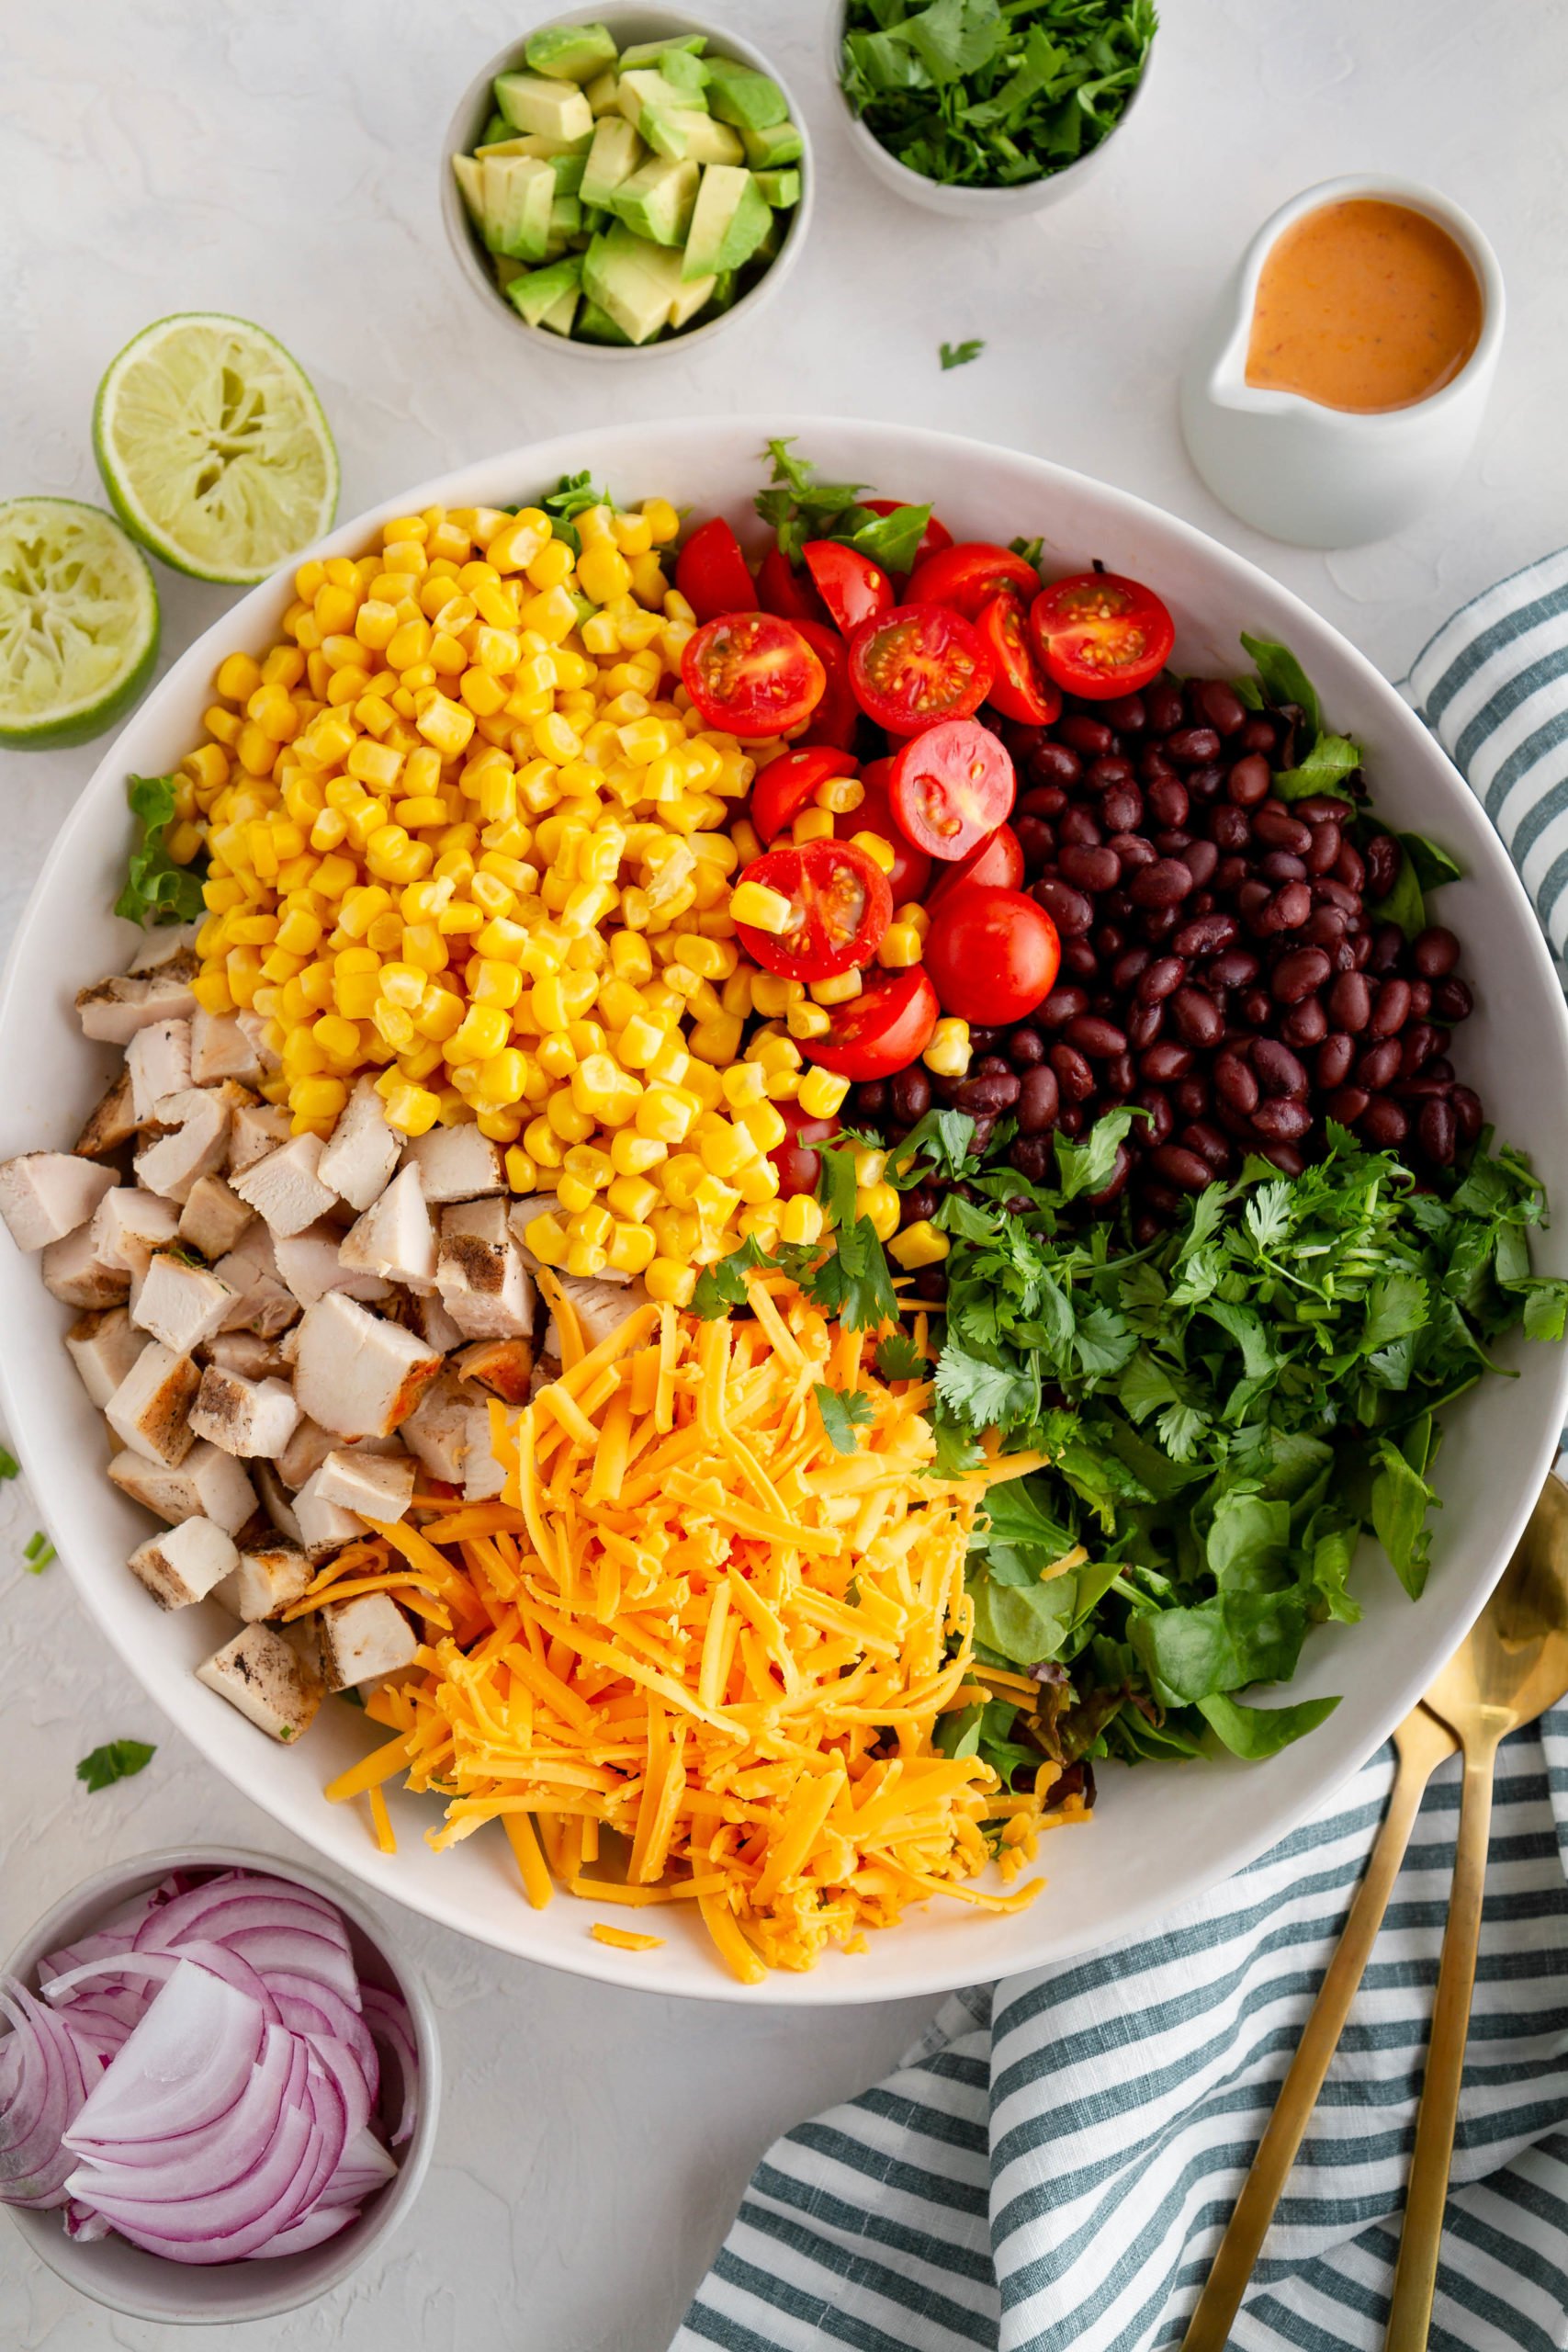 Ingredients for Southwest chicken chopped salad in a mixing bowl.